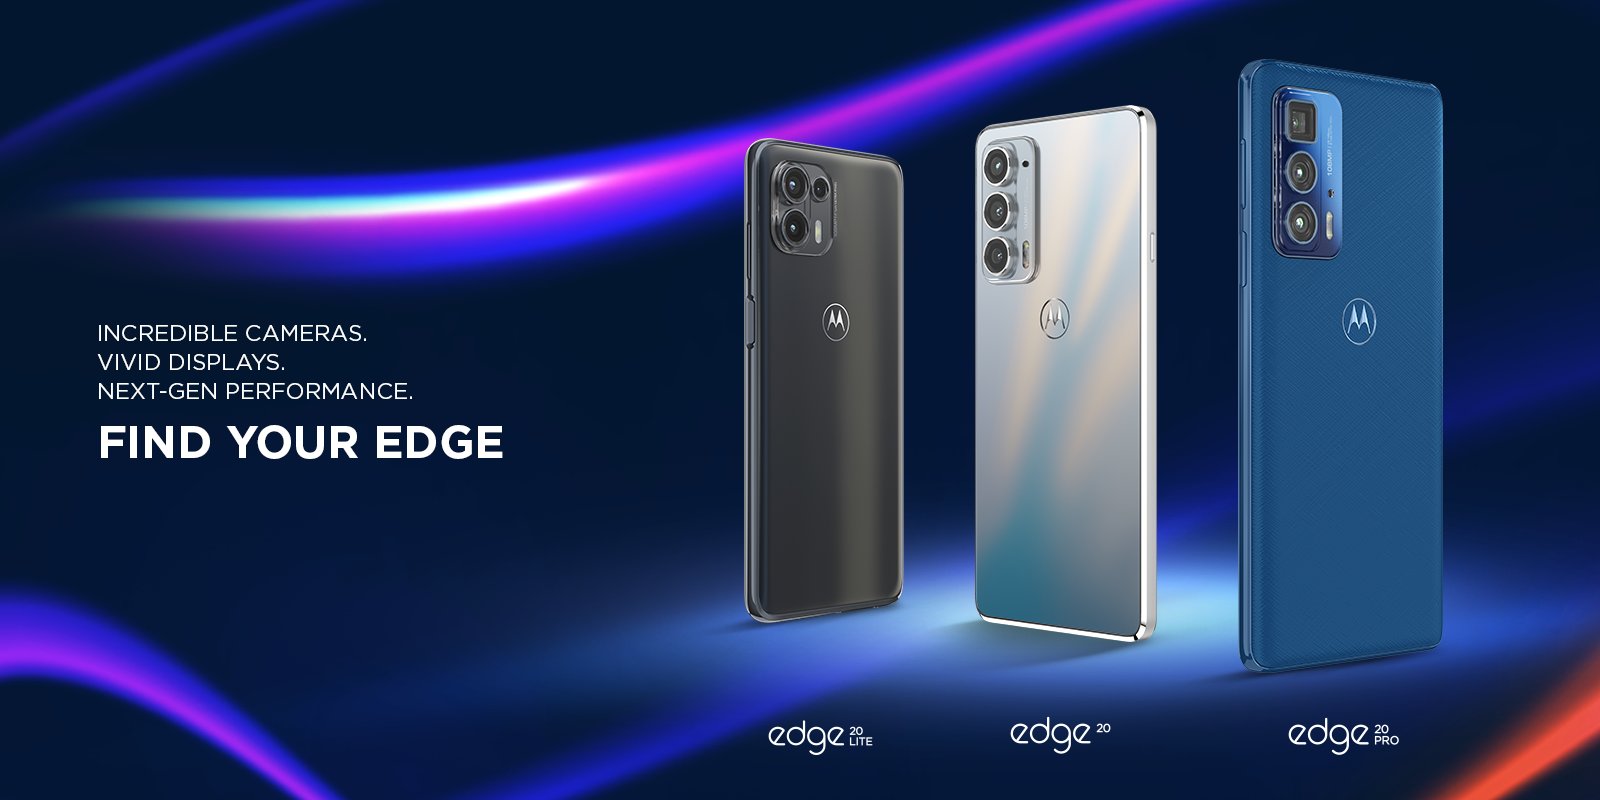 Motorola Edge 20 series debuted, Here are the key specs and pricing